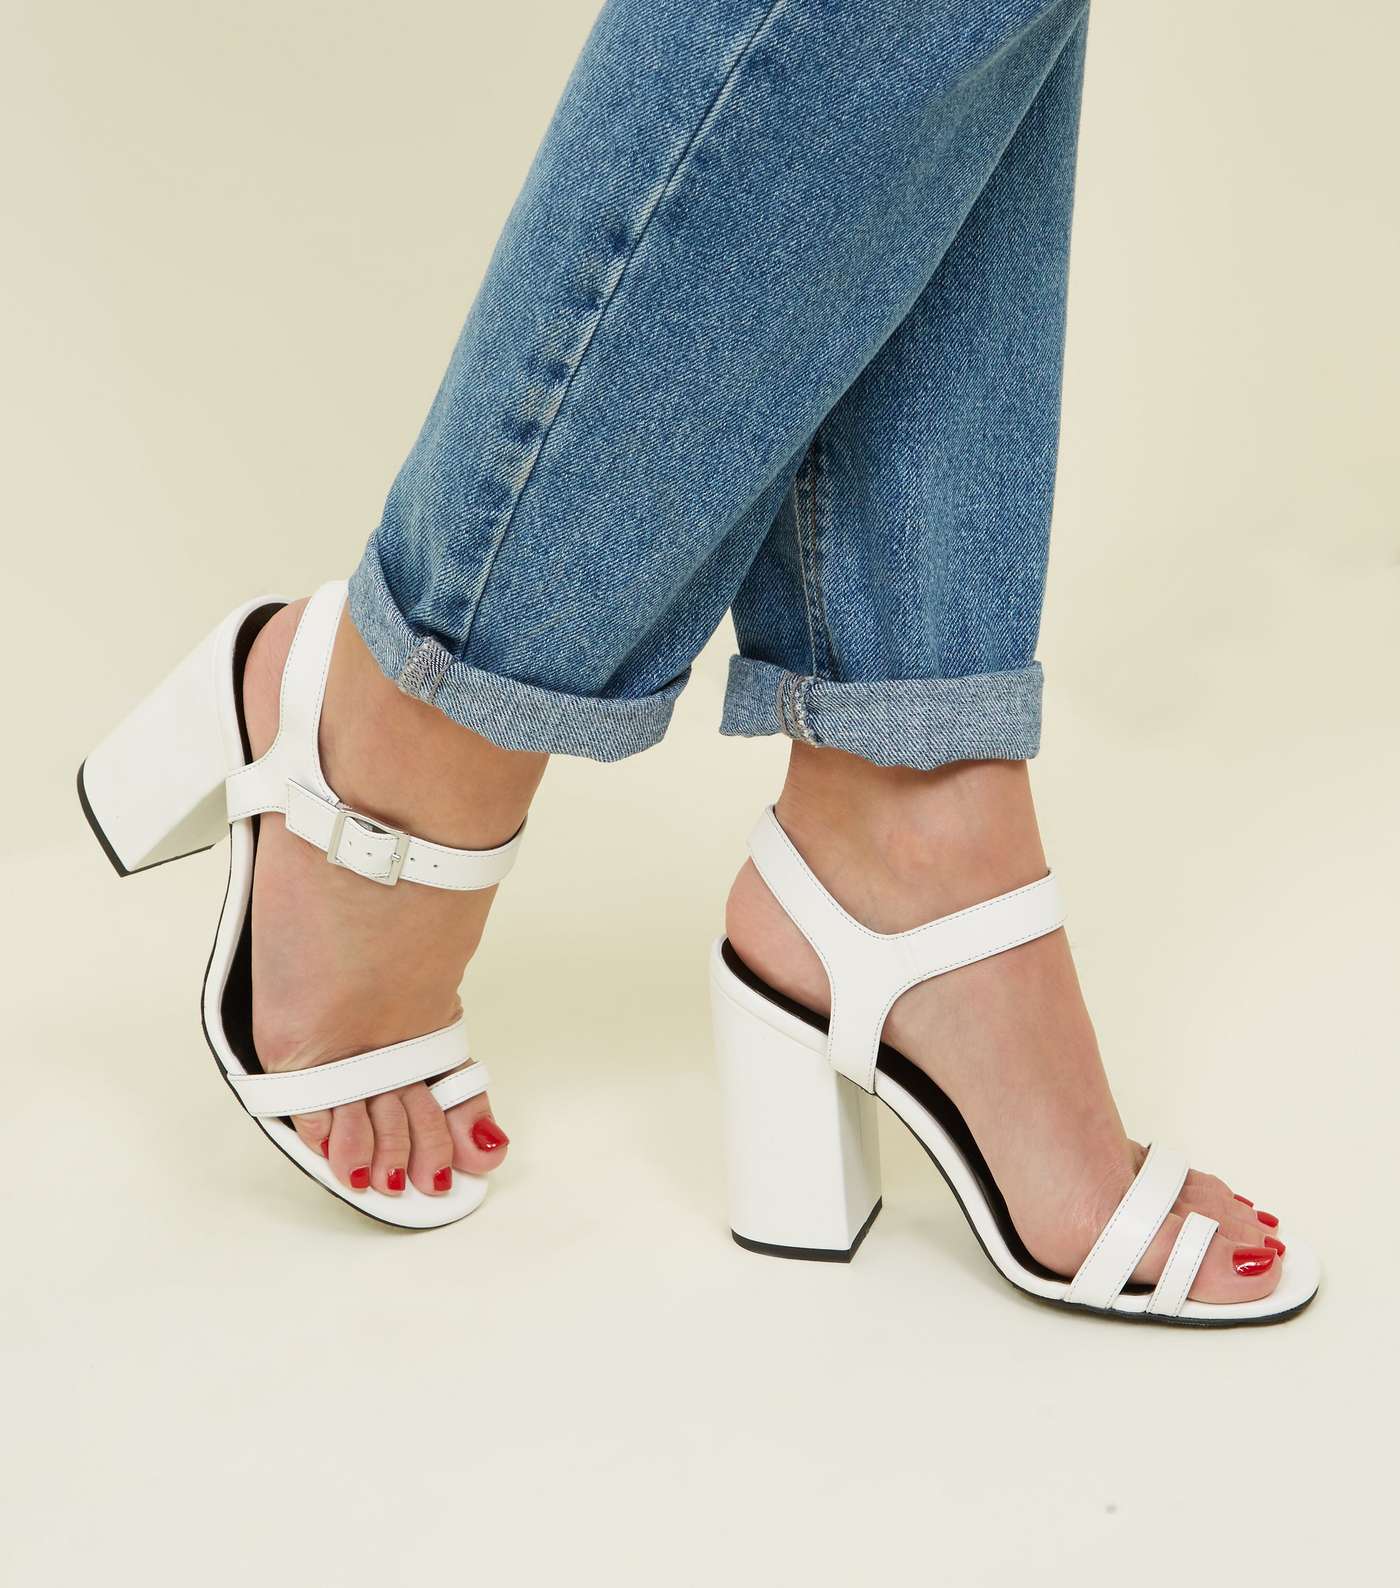 Off White Leather-Look Toe Strap Heeled Sandals  Image 2